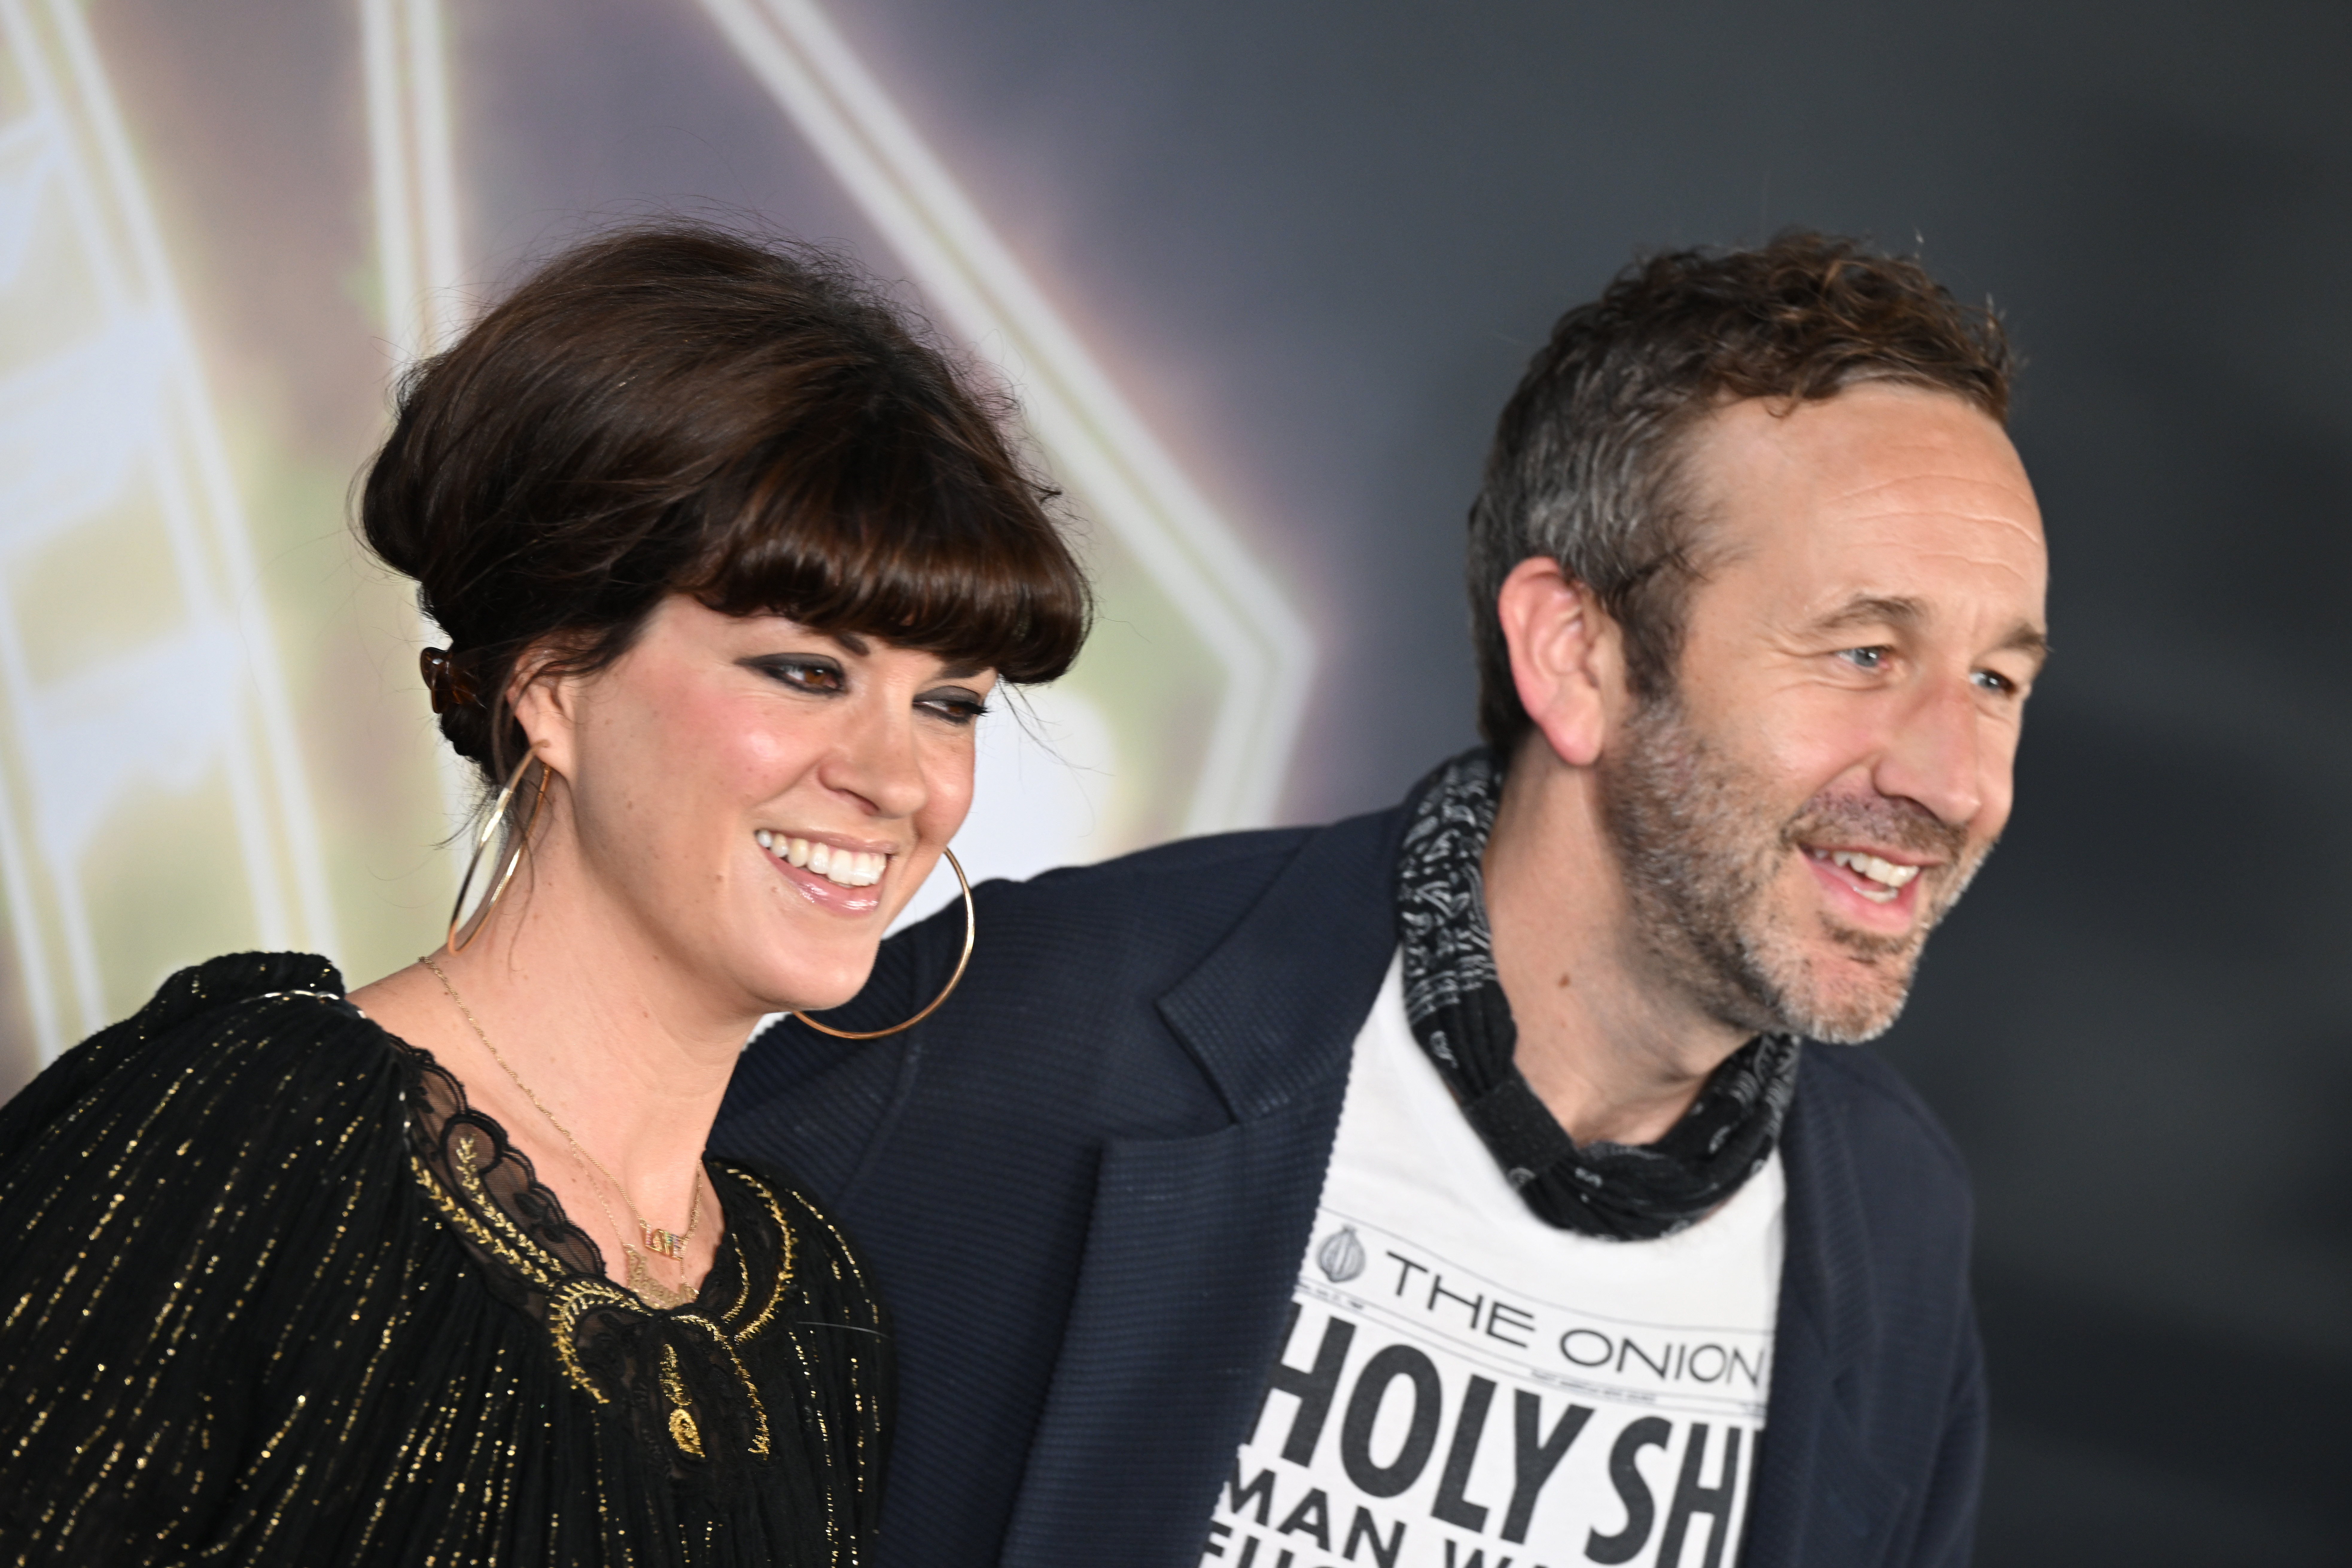 Dawn O'Porter and Chris O'Dowd at "The sand man" World premiere in 2022, in London, England.  |  Source: Getty Images